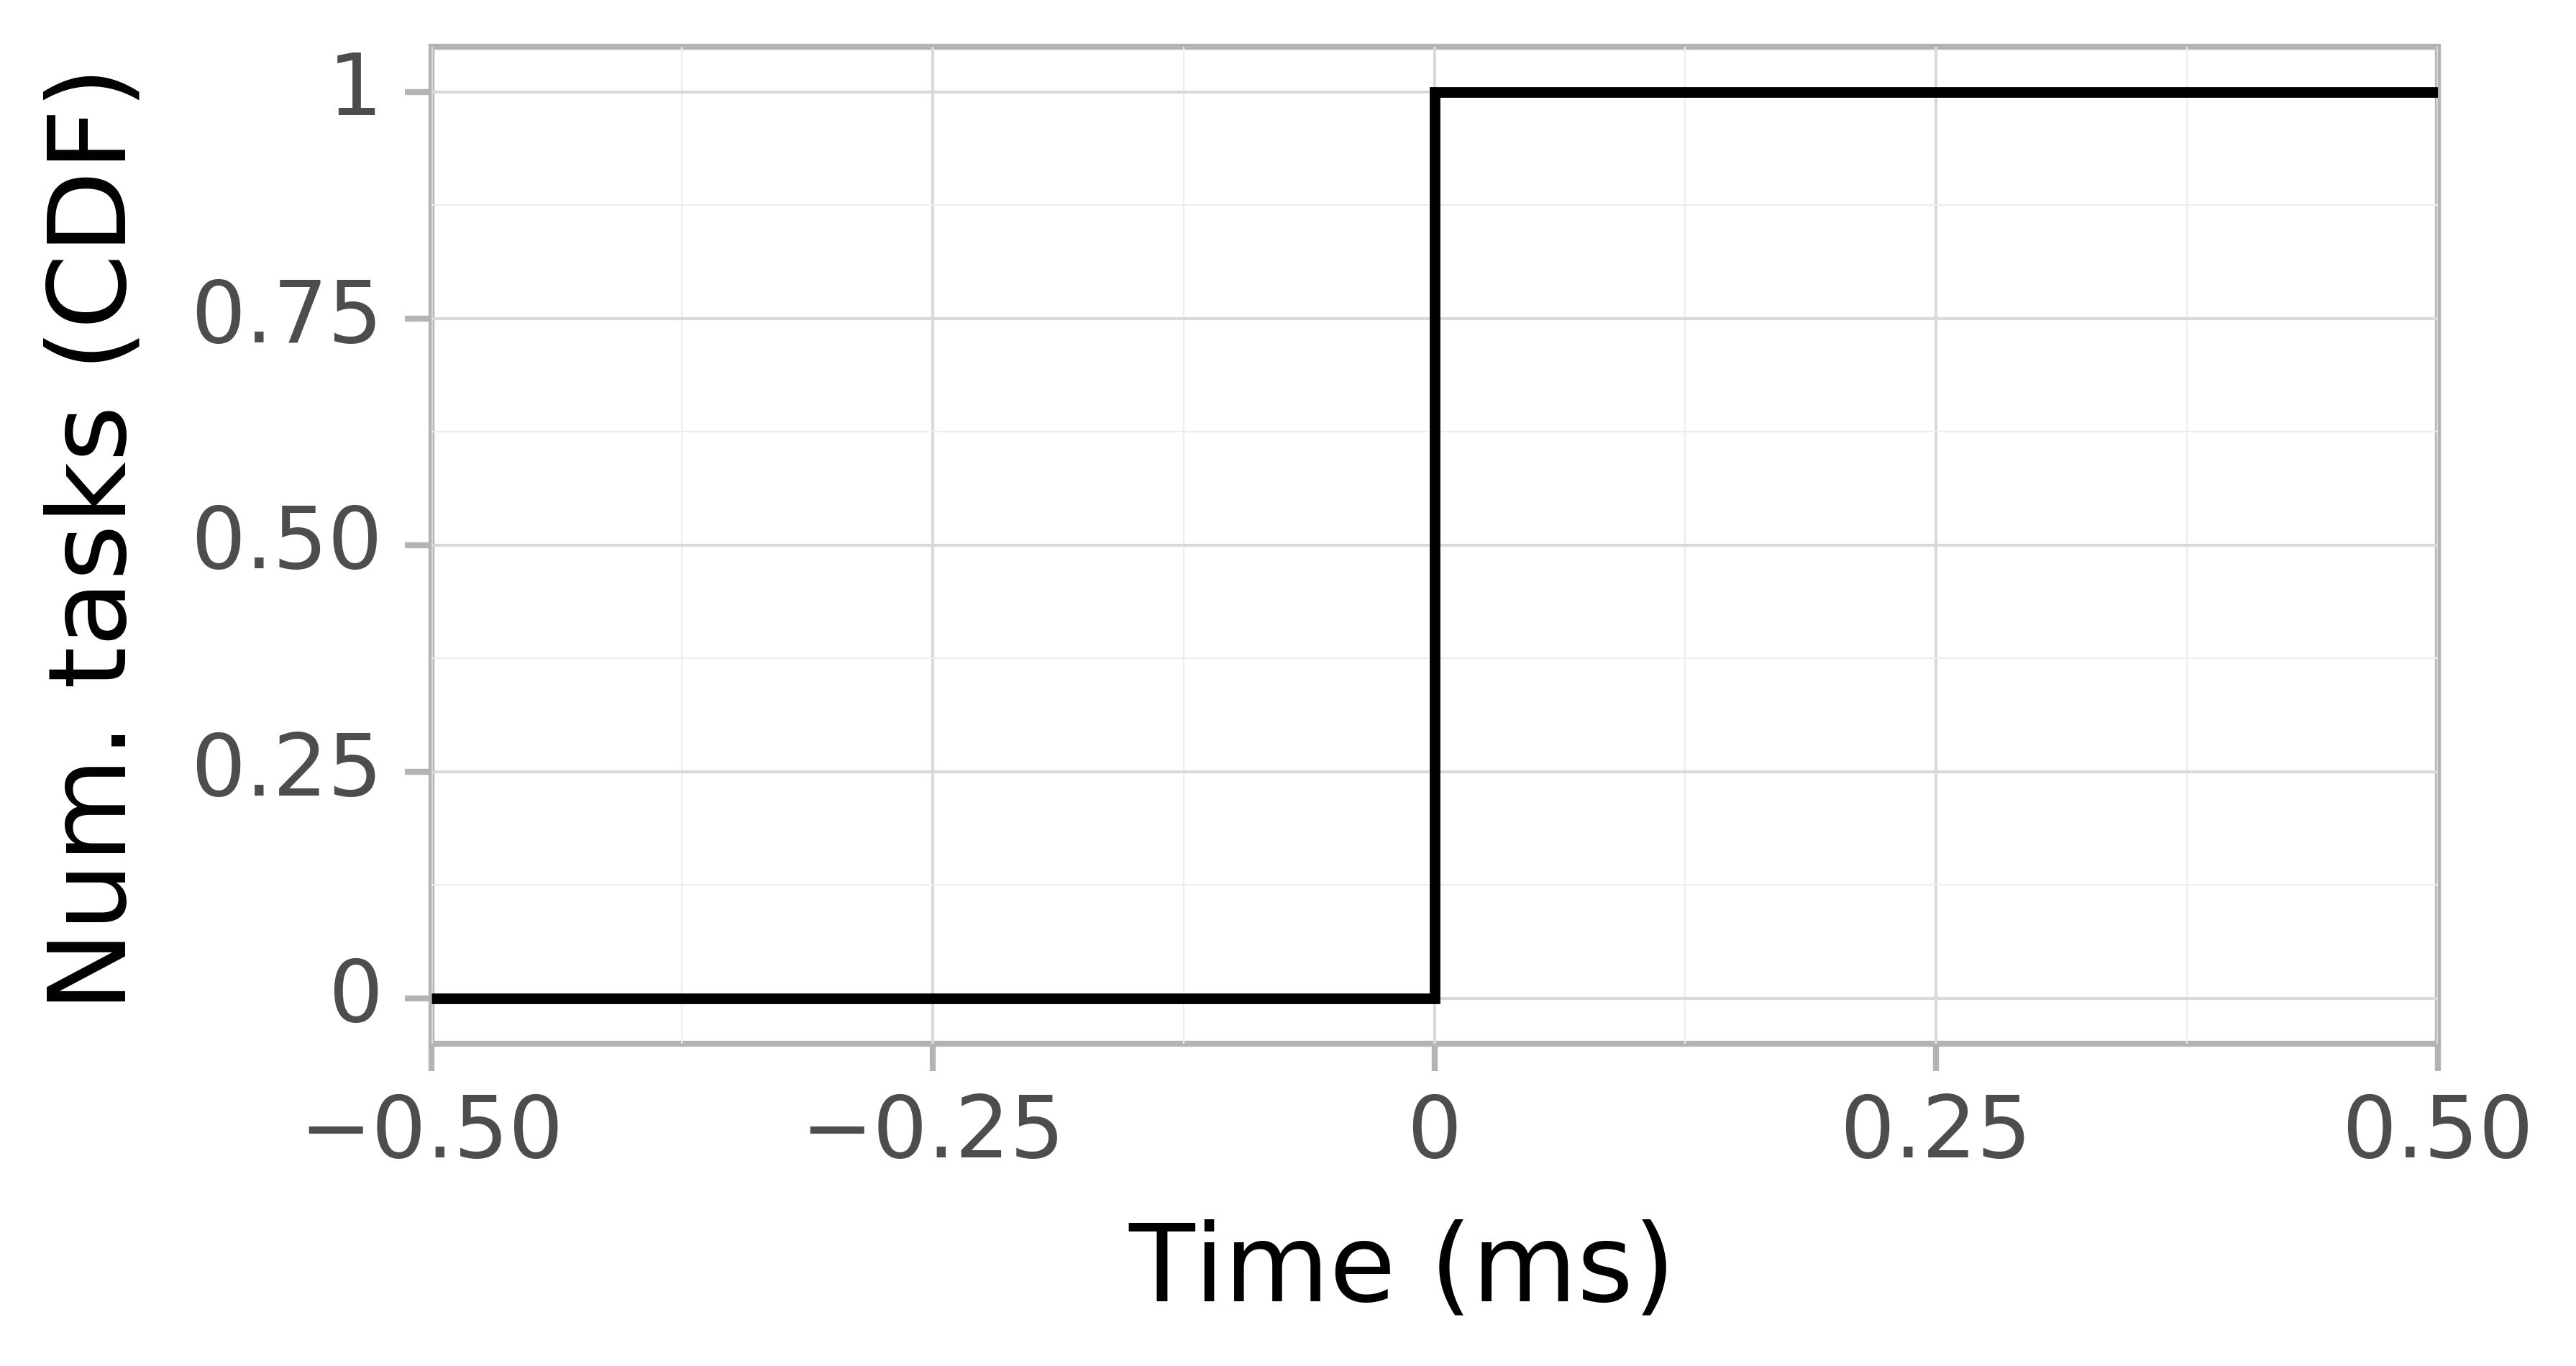 Task arrival CDF graph for the spec_trace-2 trace.